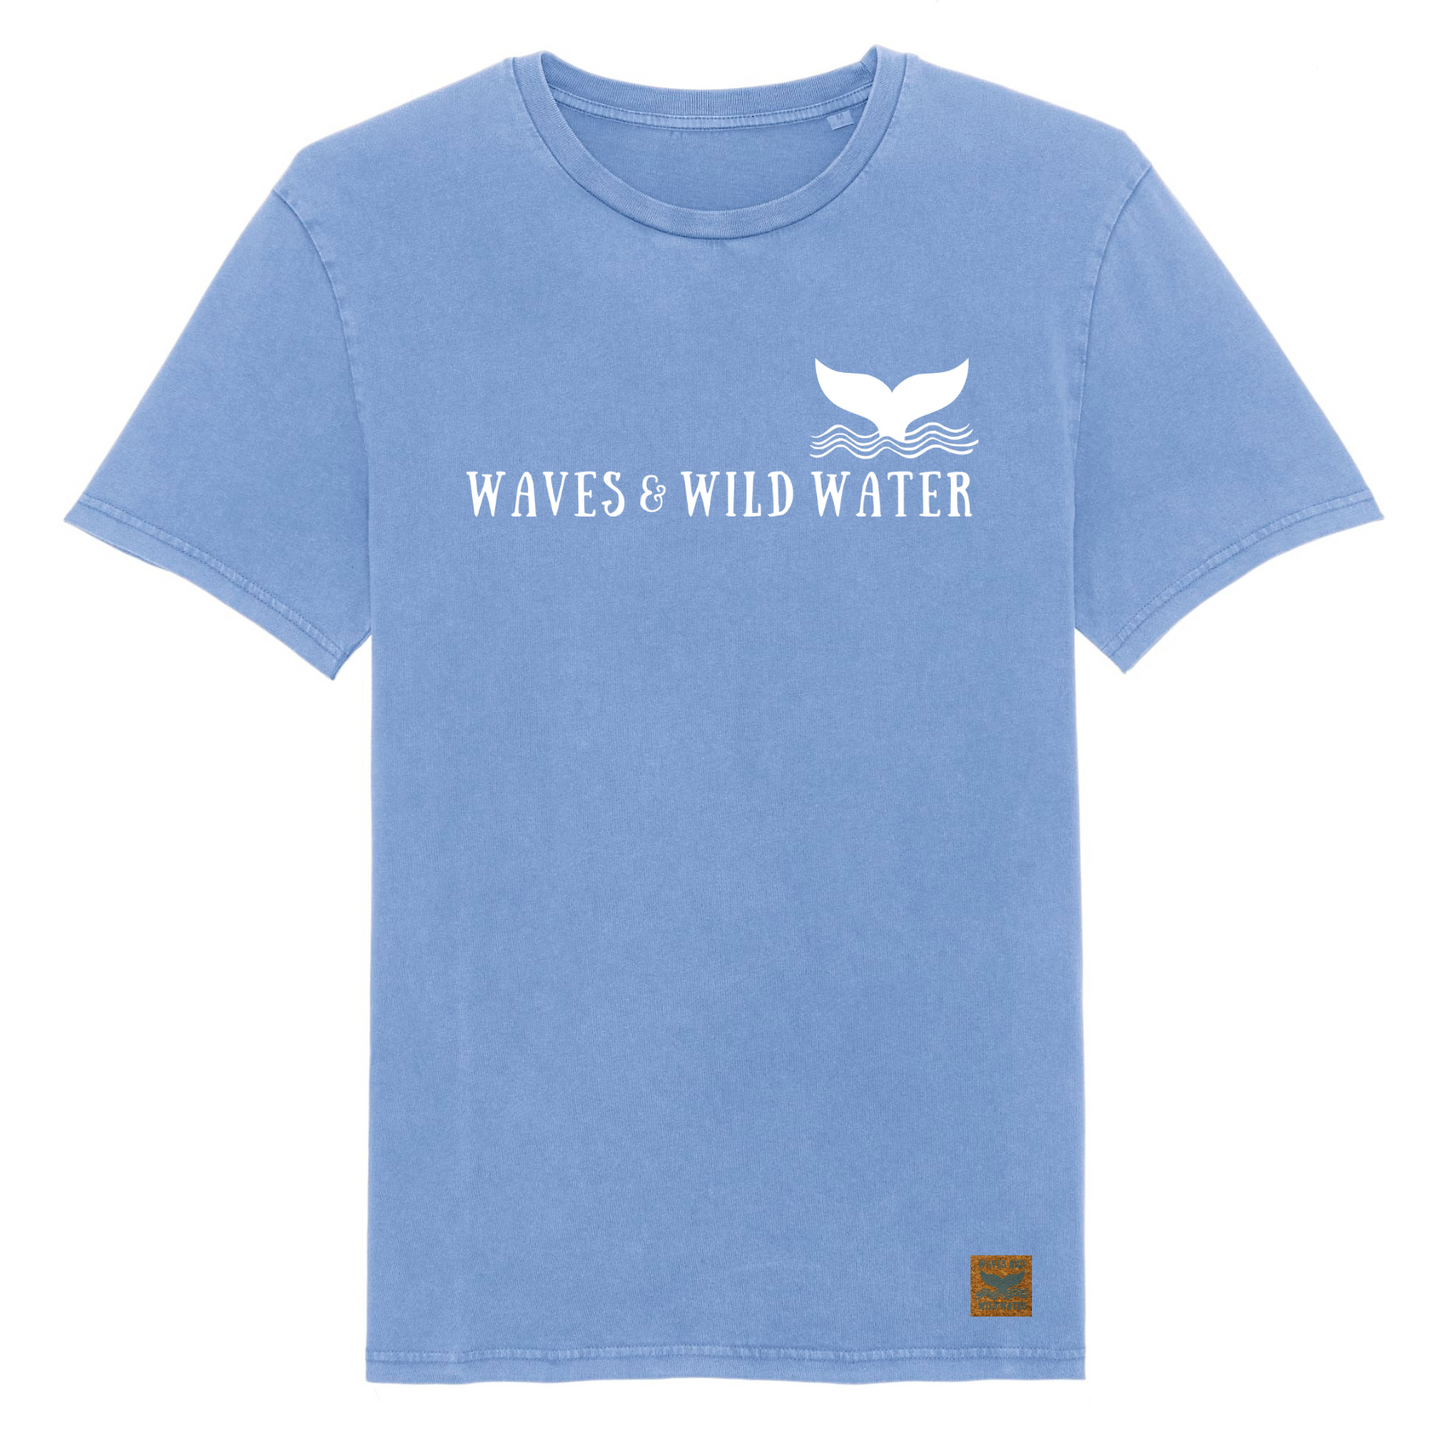 A blue t-shirt with Waves & Wild Water logo printed across the front in white ink.